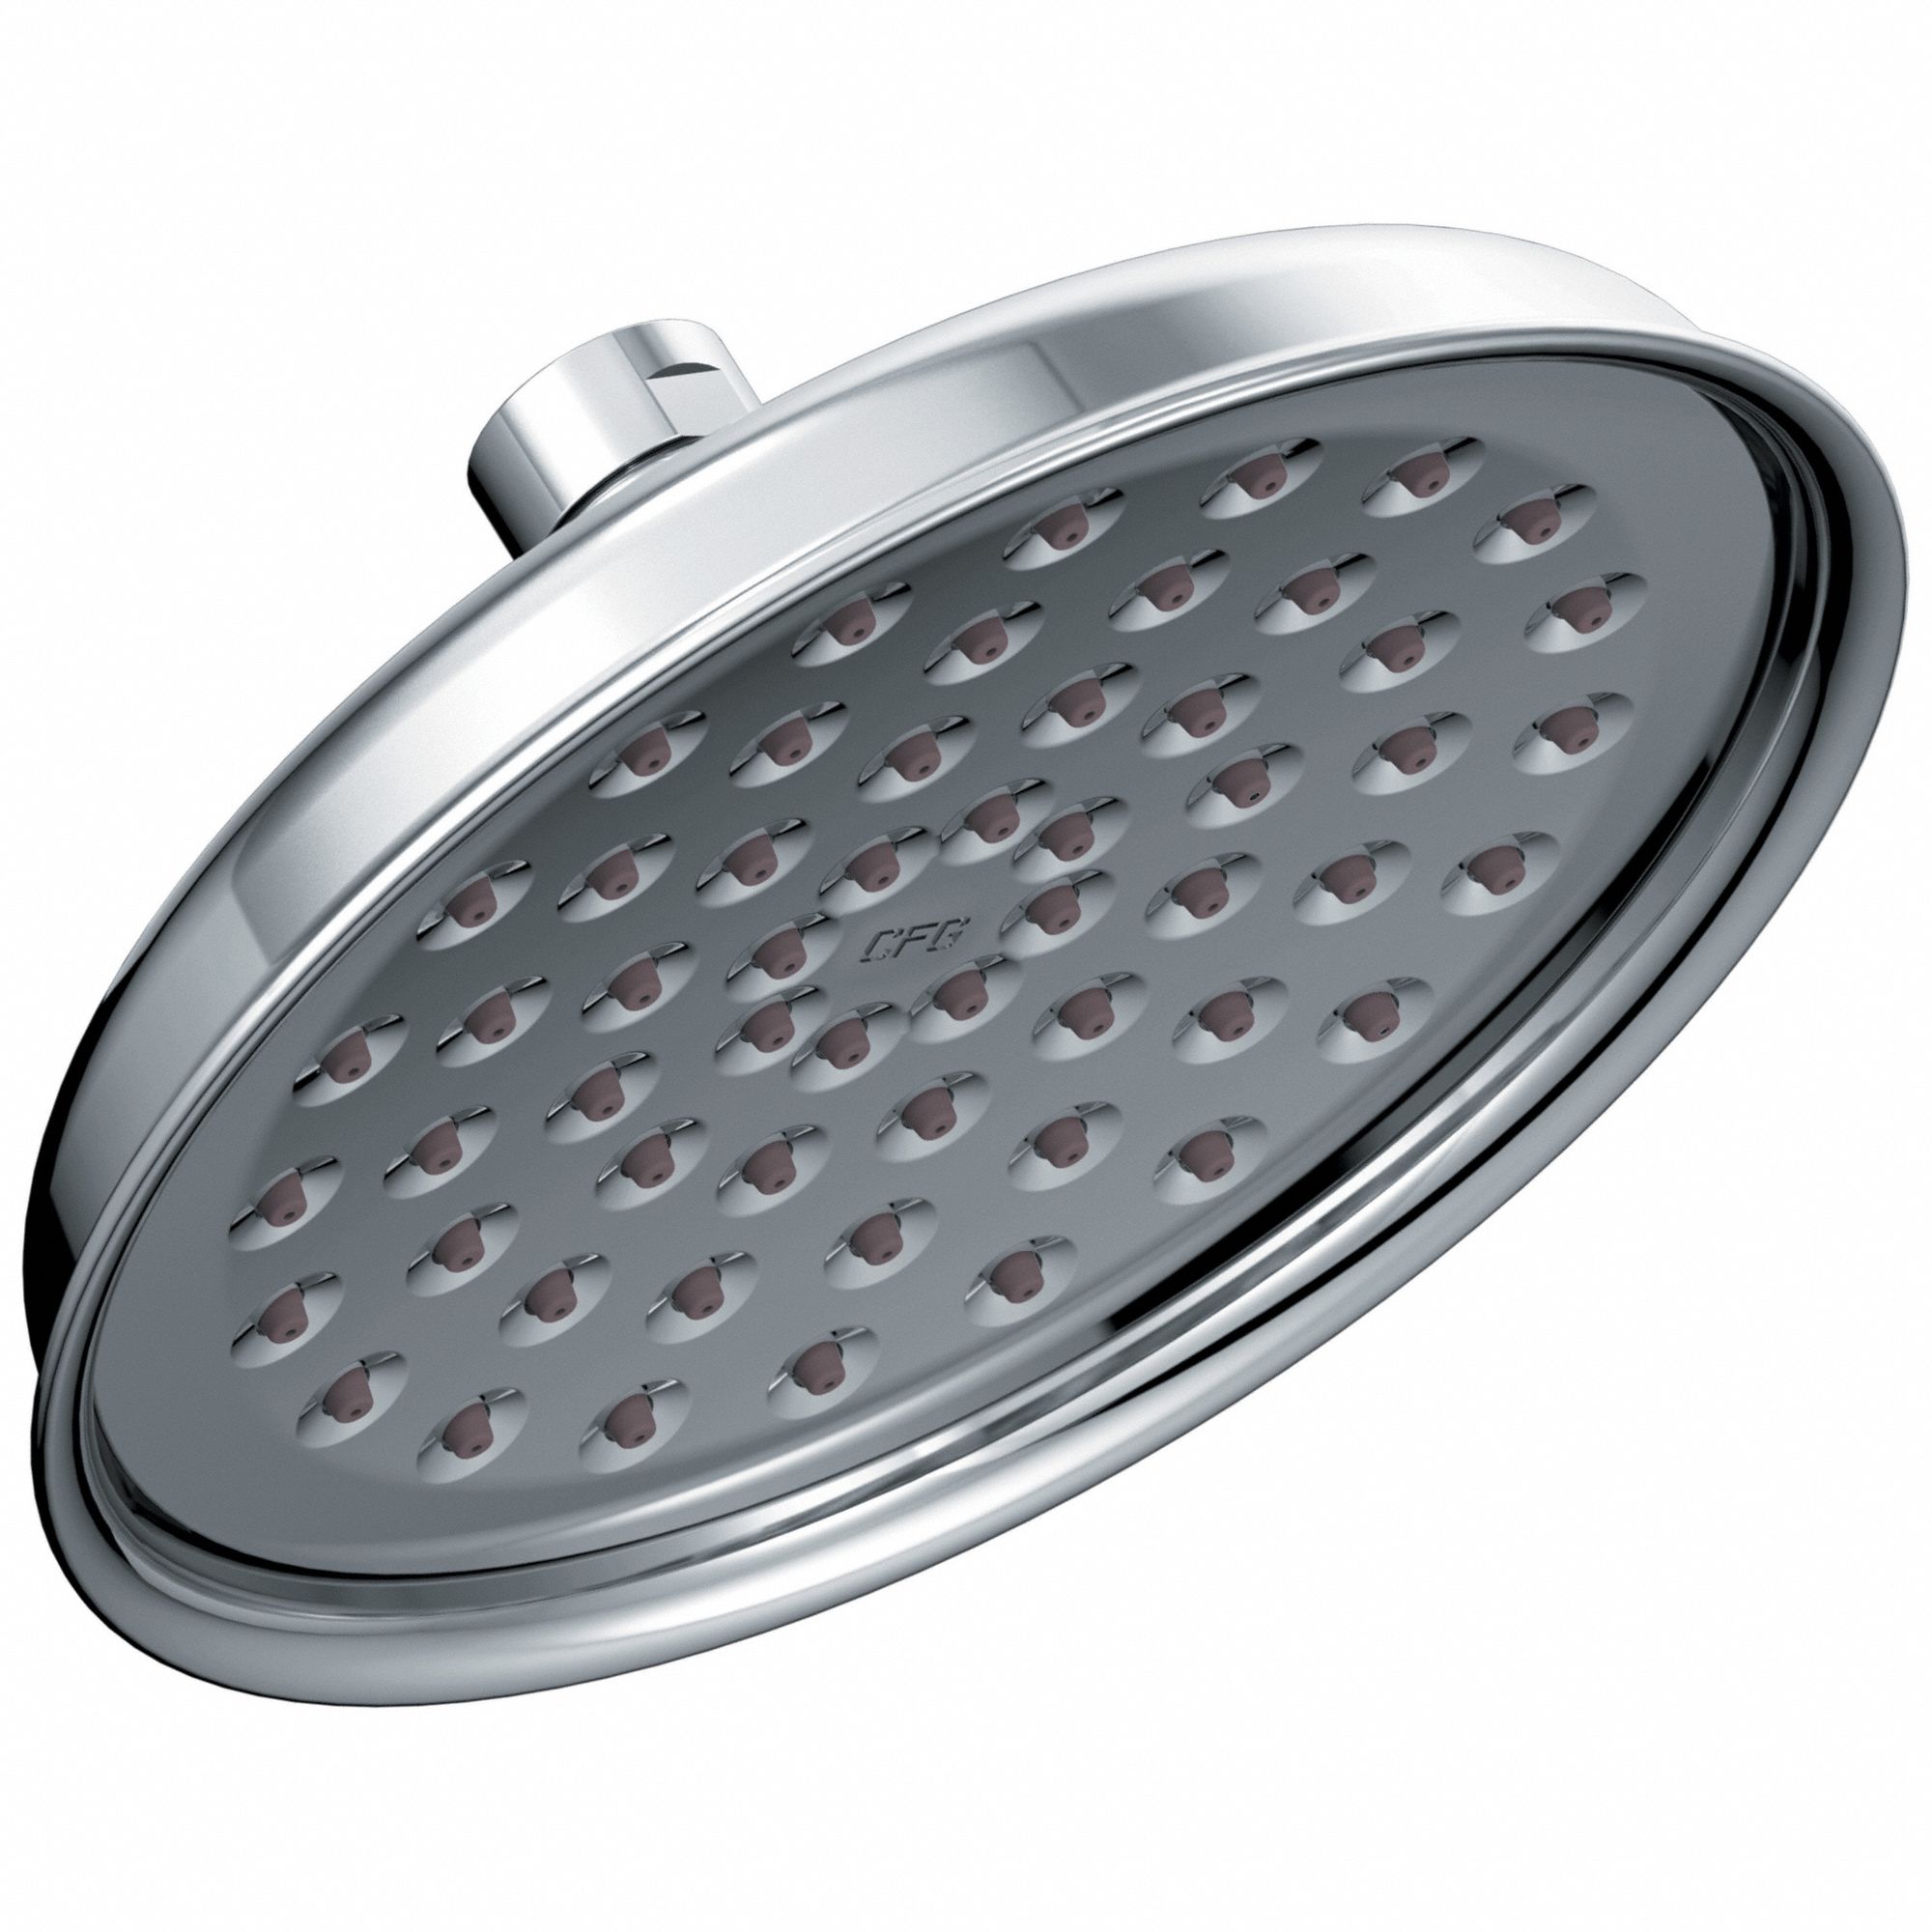 Showerhead: Cleveland Faucet Group, 47401GR, 1.75 gpm Fixed Showerhead Flow Rate, Chrome Finish